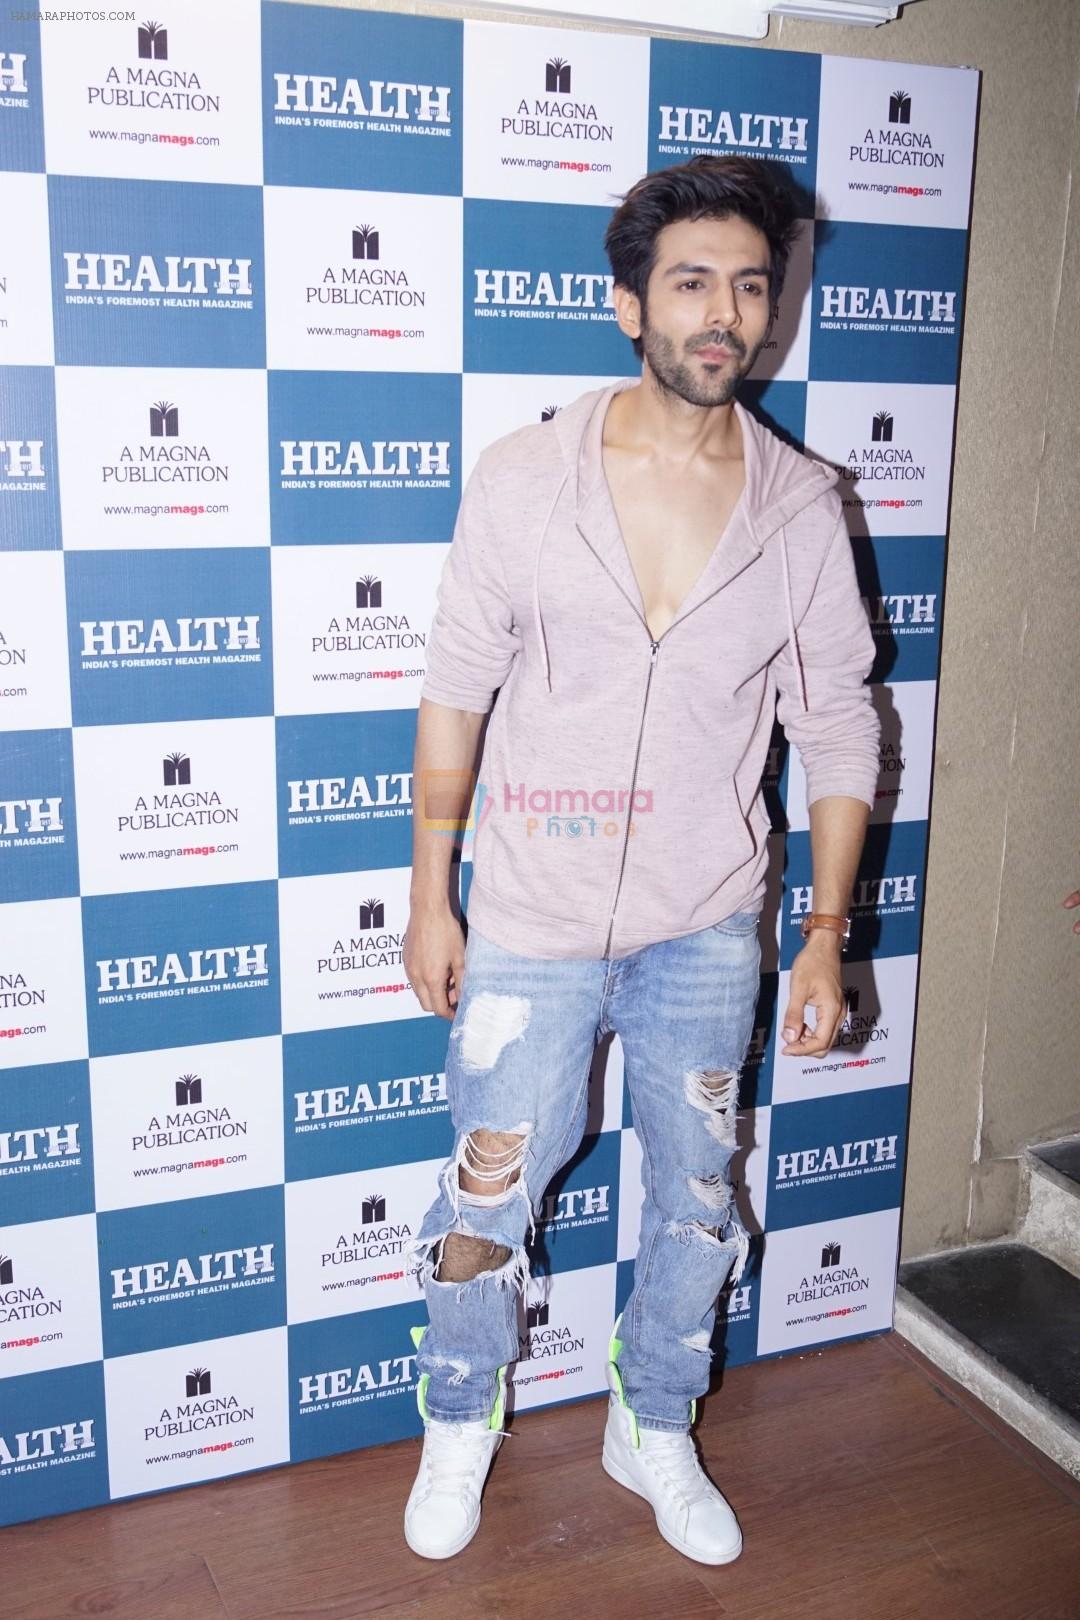 Kartik Aaryan On Cover Page Of Health & Nutrition Magazine on 8th March 2018